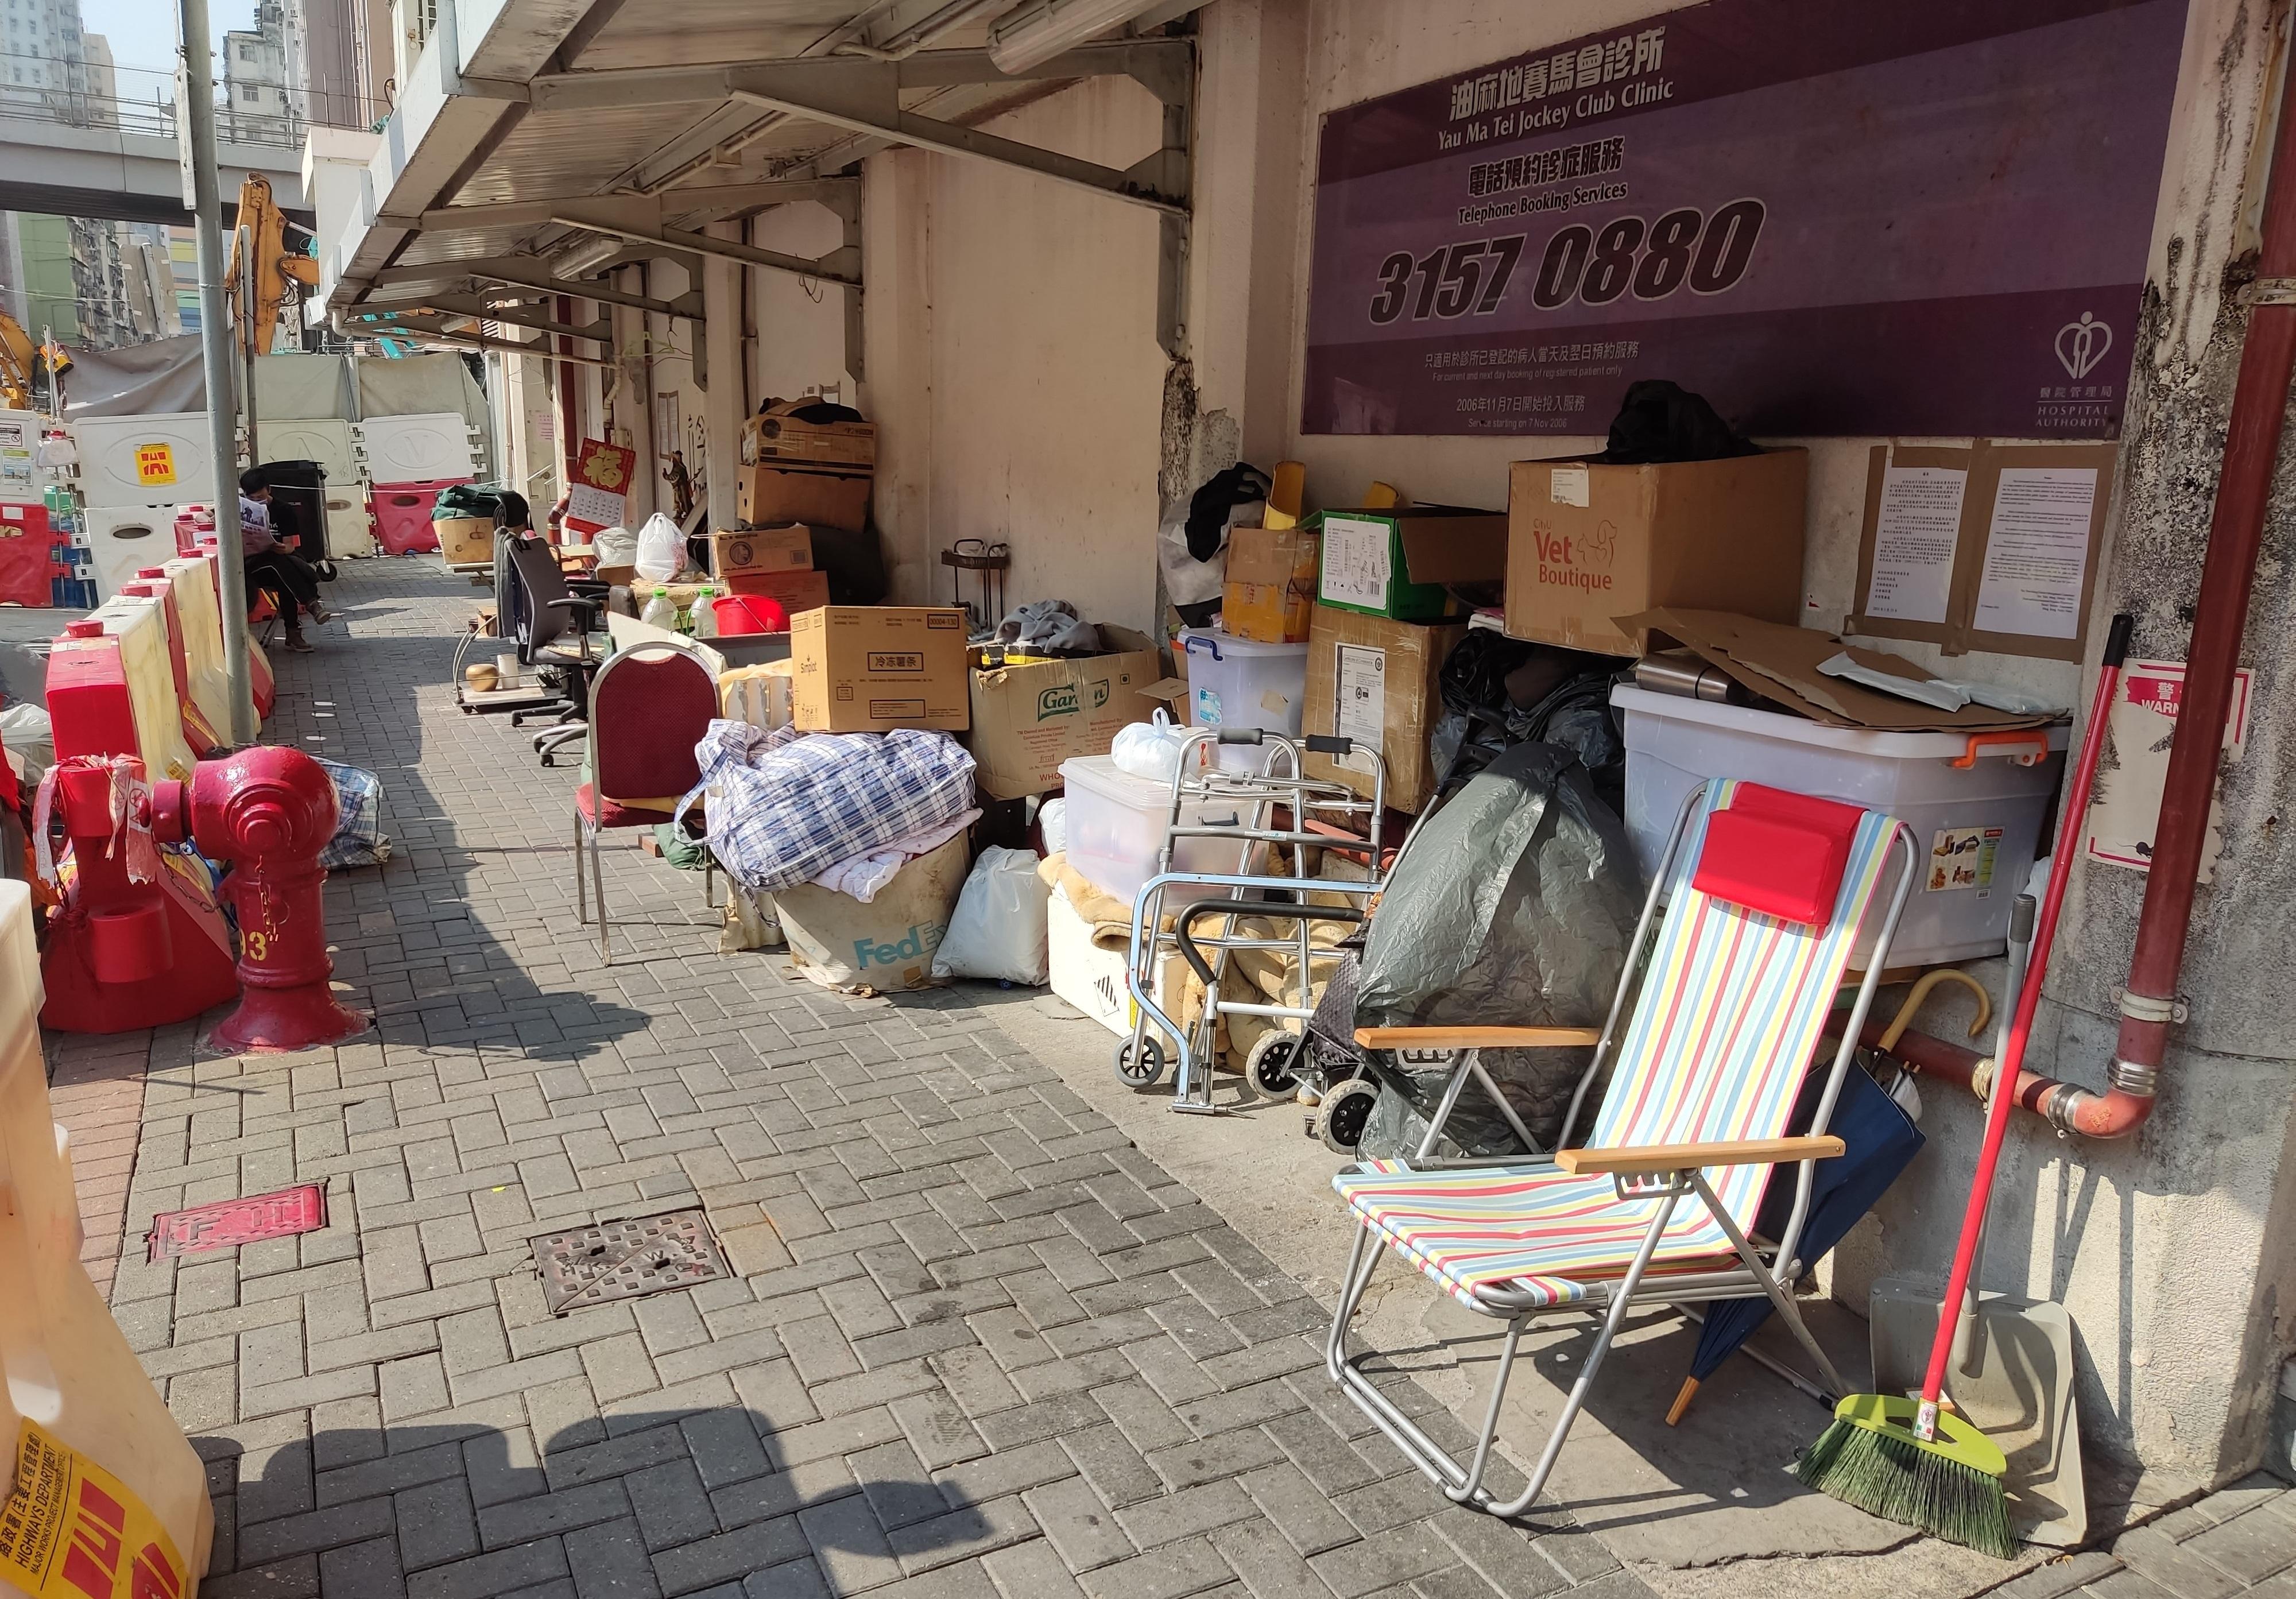 The Yau Tsim Mong District Office, together with relevant Govermrmt departments, today (February 28) conducted a joint operation to clear the miscellaneous articles outside the Yau Ma Tei Jockey Club General Out-patient Clinic.  Photo shows the front entrance of the Clinic before the joint operation.
